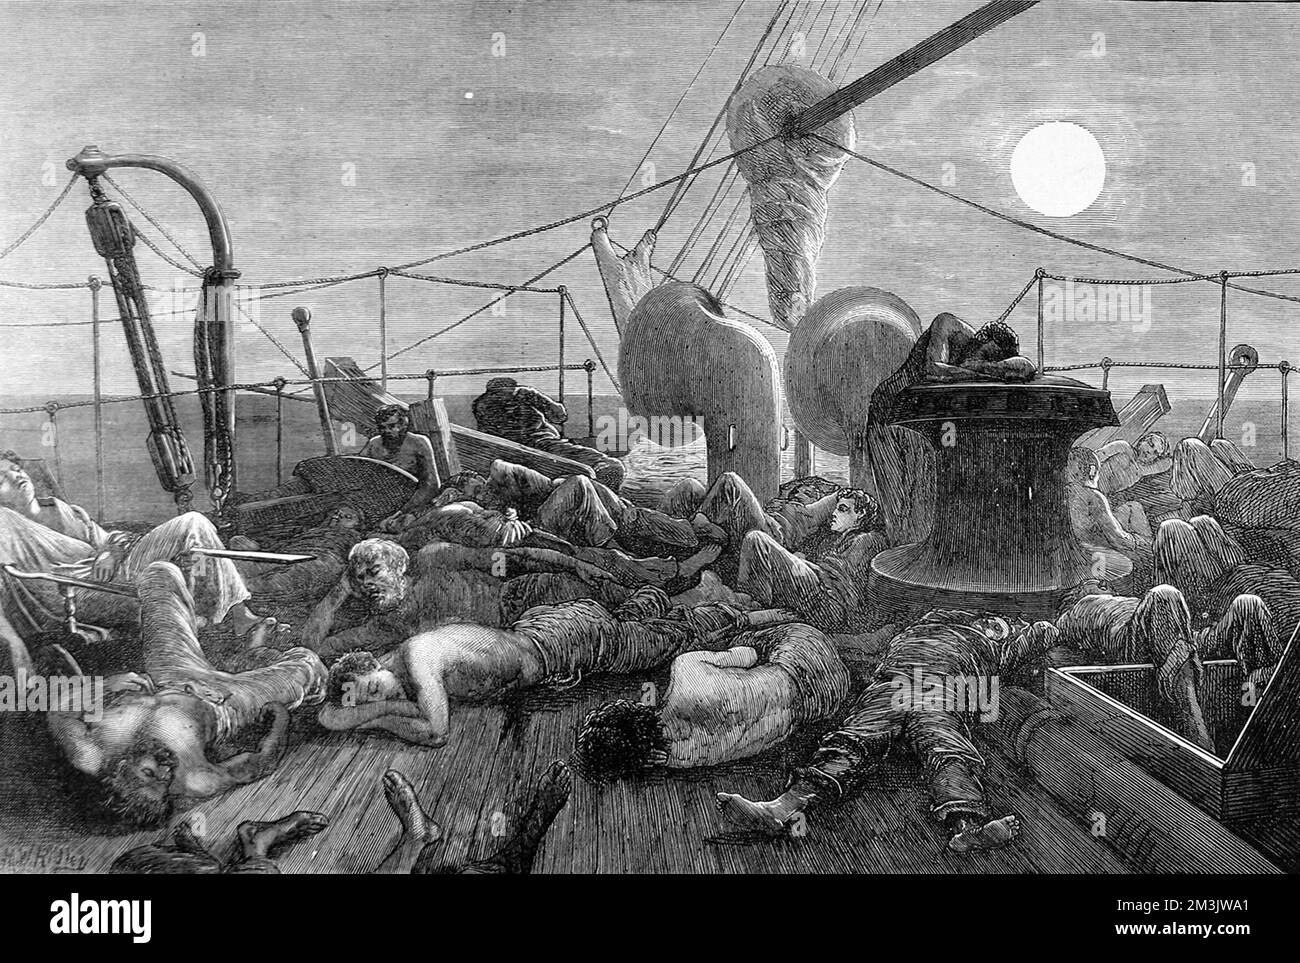 The forecastle of a mail steamer at night, in the Red Sea, 1872. The oppressive heat of the area has driven some of the crew and passengers to sleep on the front deck of the ship, where they might be cooled by a breeze.  1872 Stock Photo